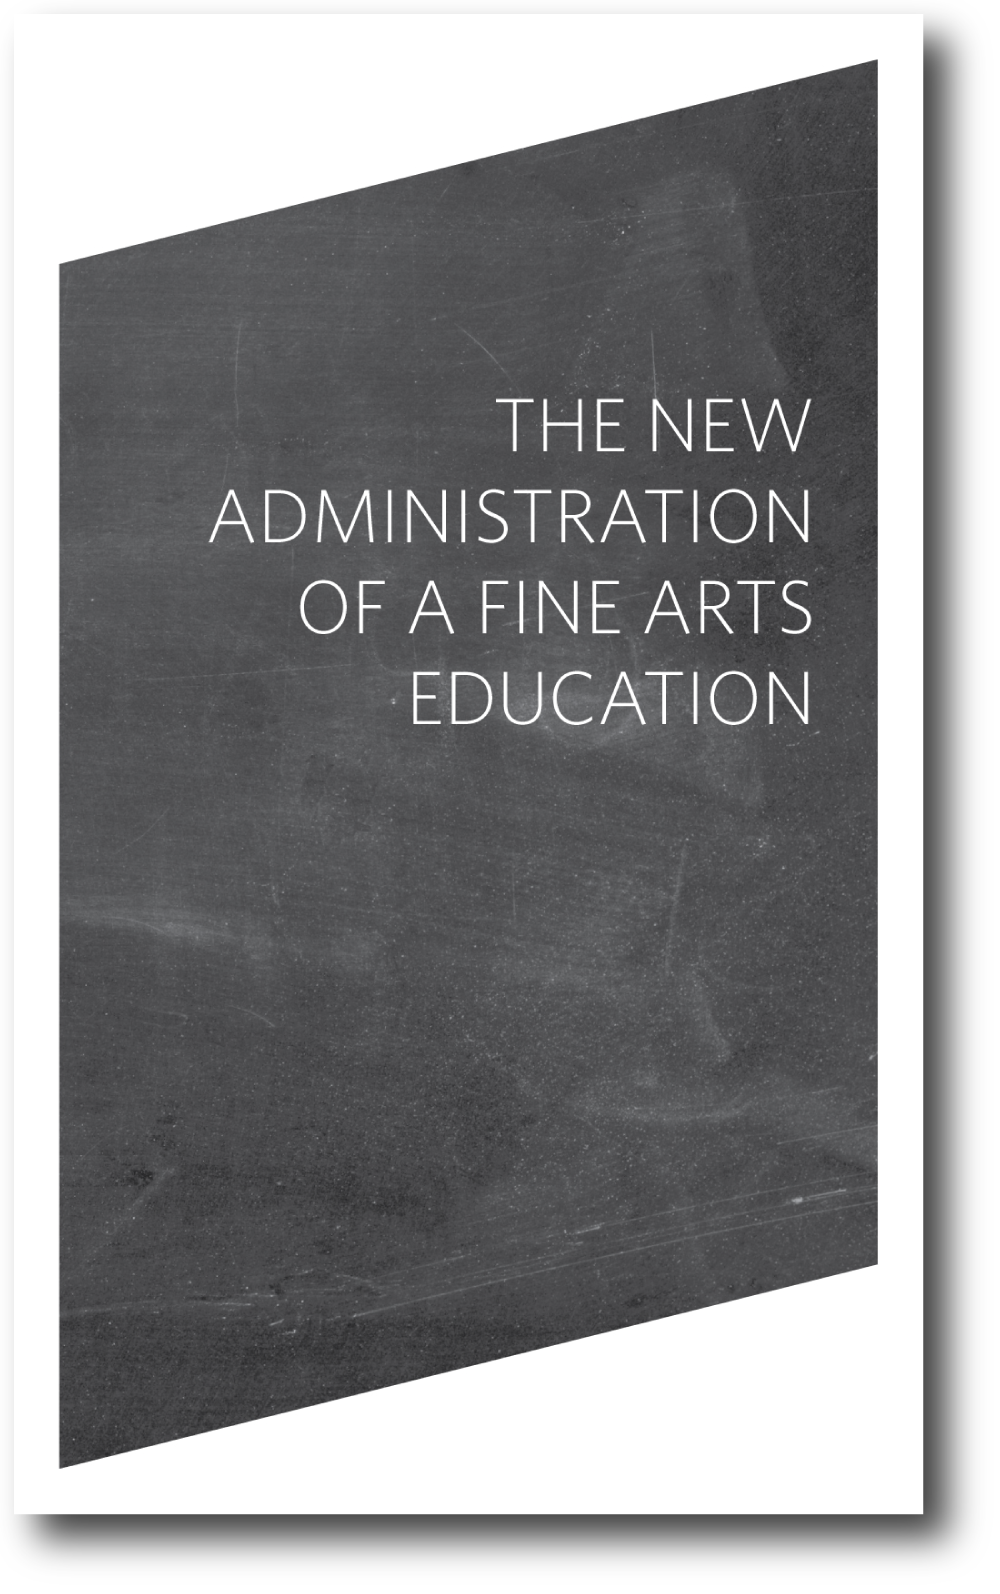   The New Administration of a Fine Arts Education , 2011,&nbsp;60 pages, 8.25 x 5 inches. 